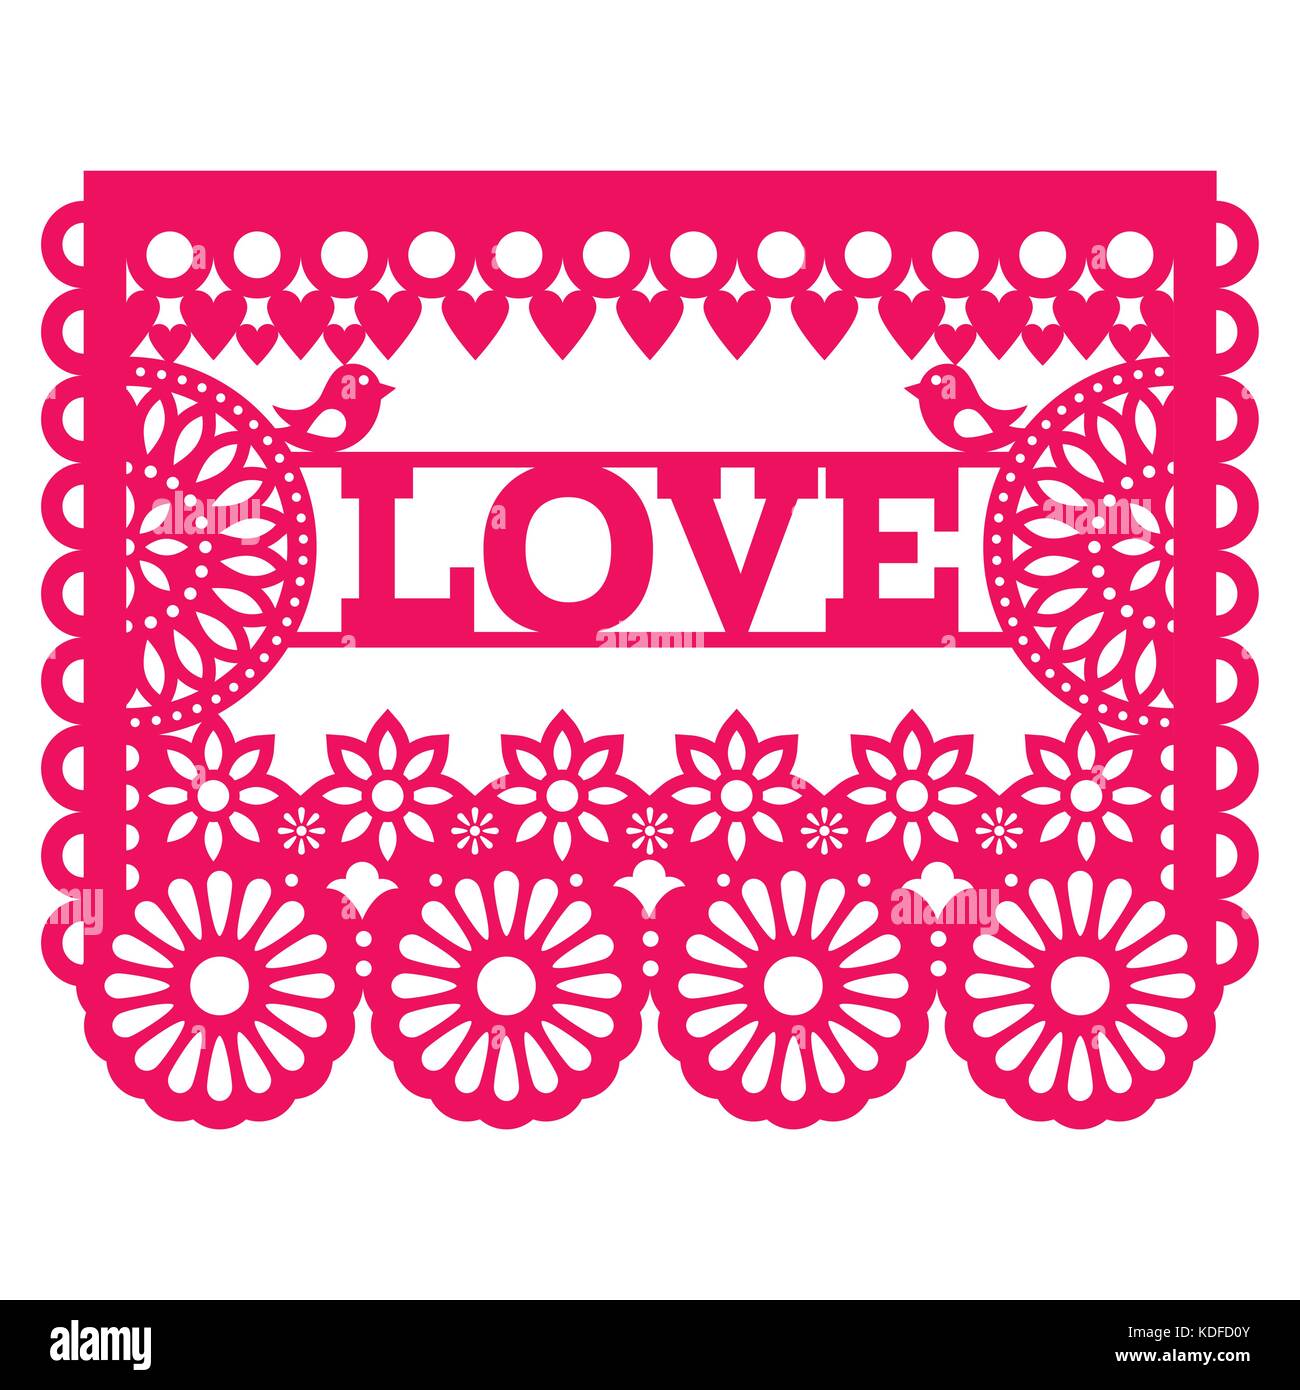 Mexican Papel Picado design - love vector pattern greeting card for celebrating Valentine's Day, wedding or birthday Stock Vector